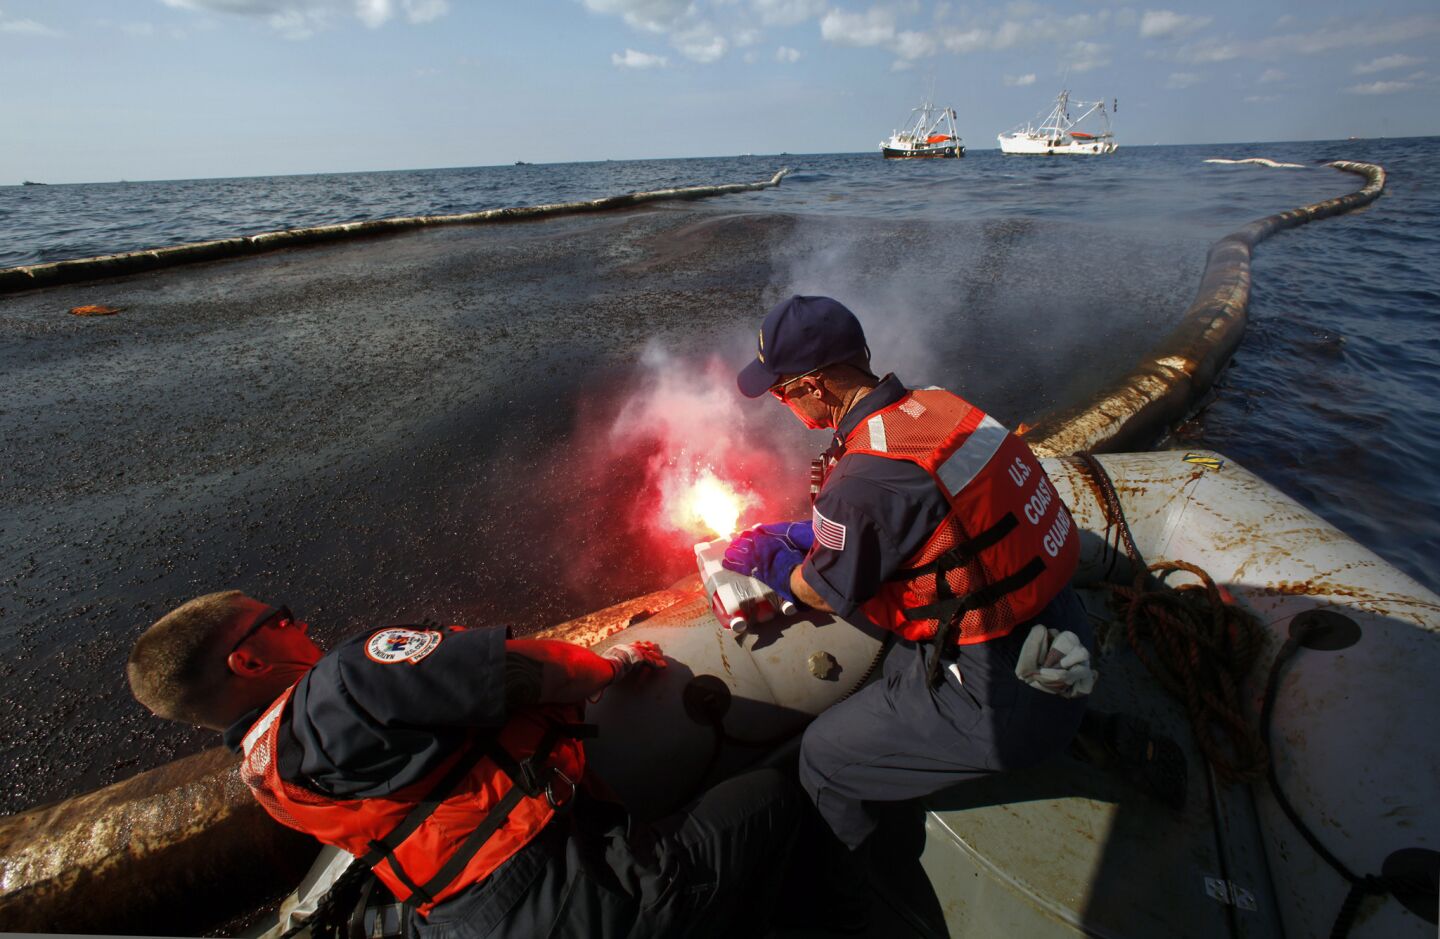 In July 2010, a Coast Guard team ignites oil collected on the surface of the water about 7 miles north of the spill site. Burning was just one of several ways to try to dispose of the oil, which continued to spill into the Gulf of Mexico.